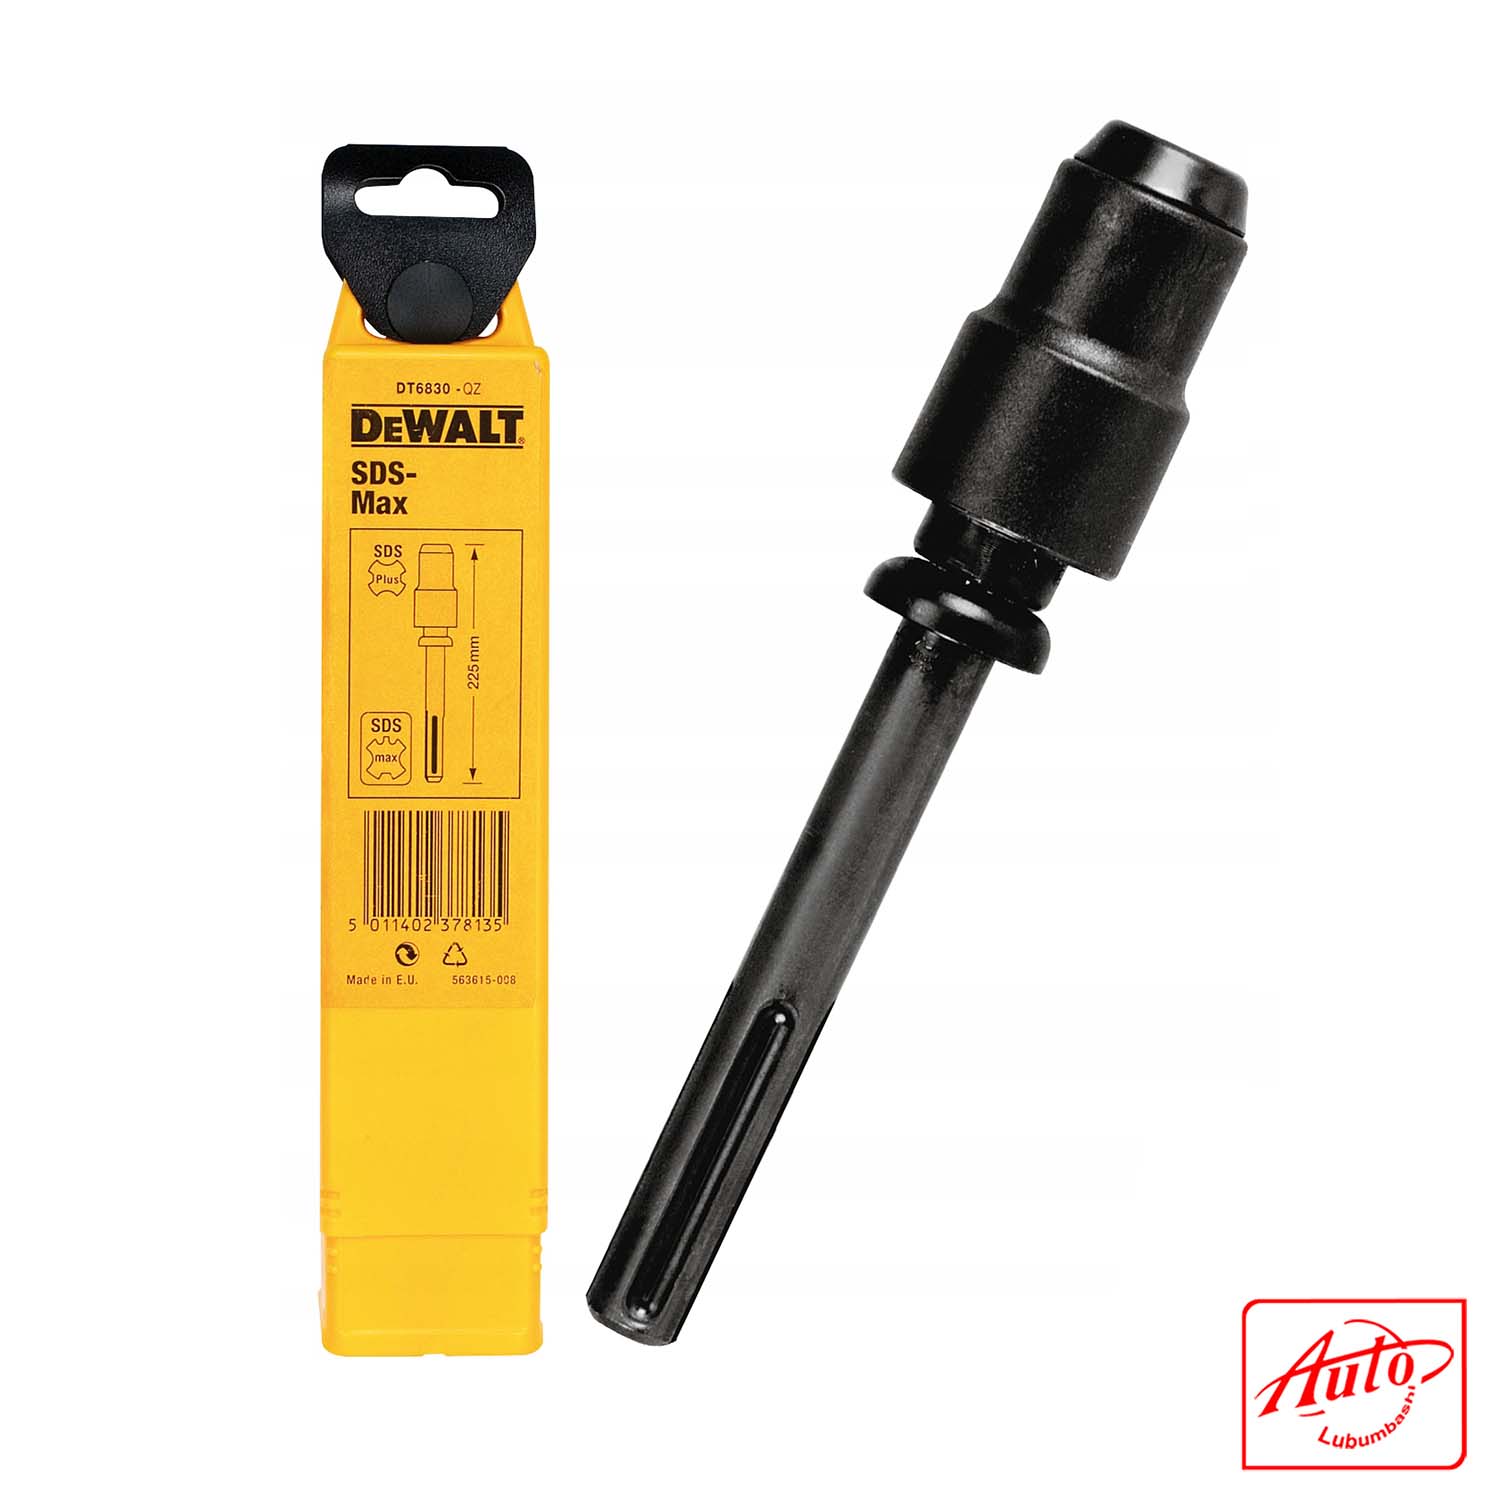 Cataract Sørge over Okklusion SDS-MAX TO SDS-PLUS ADAPTER – DEWALT – Auto Lubumbashi